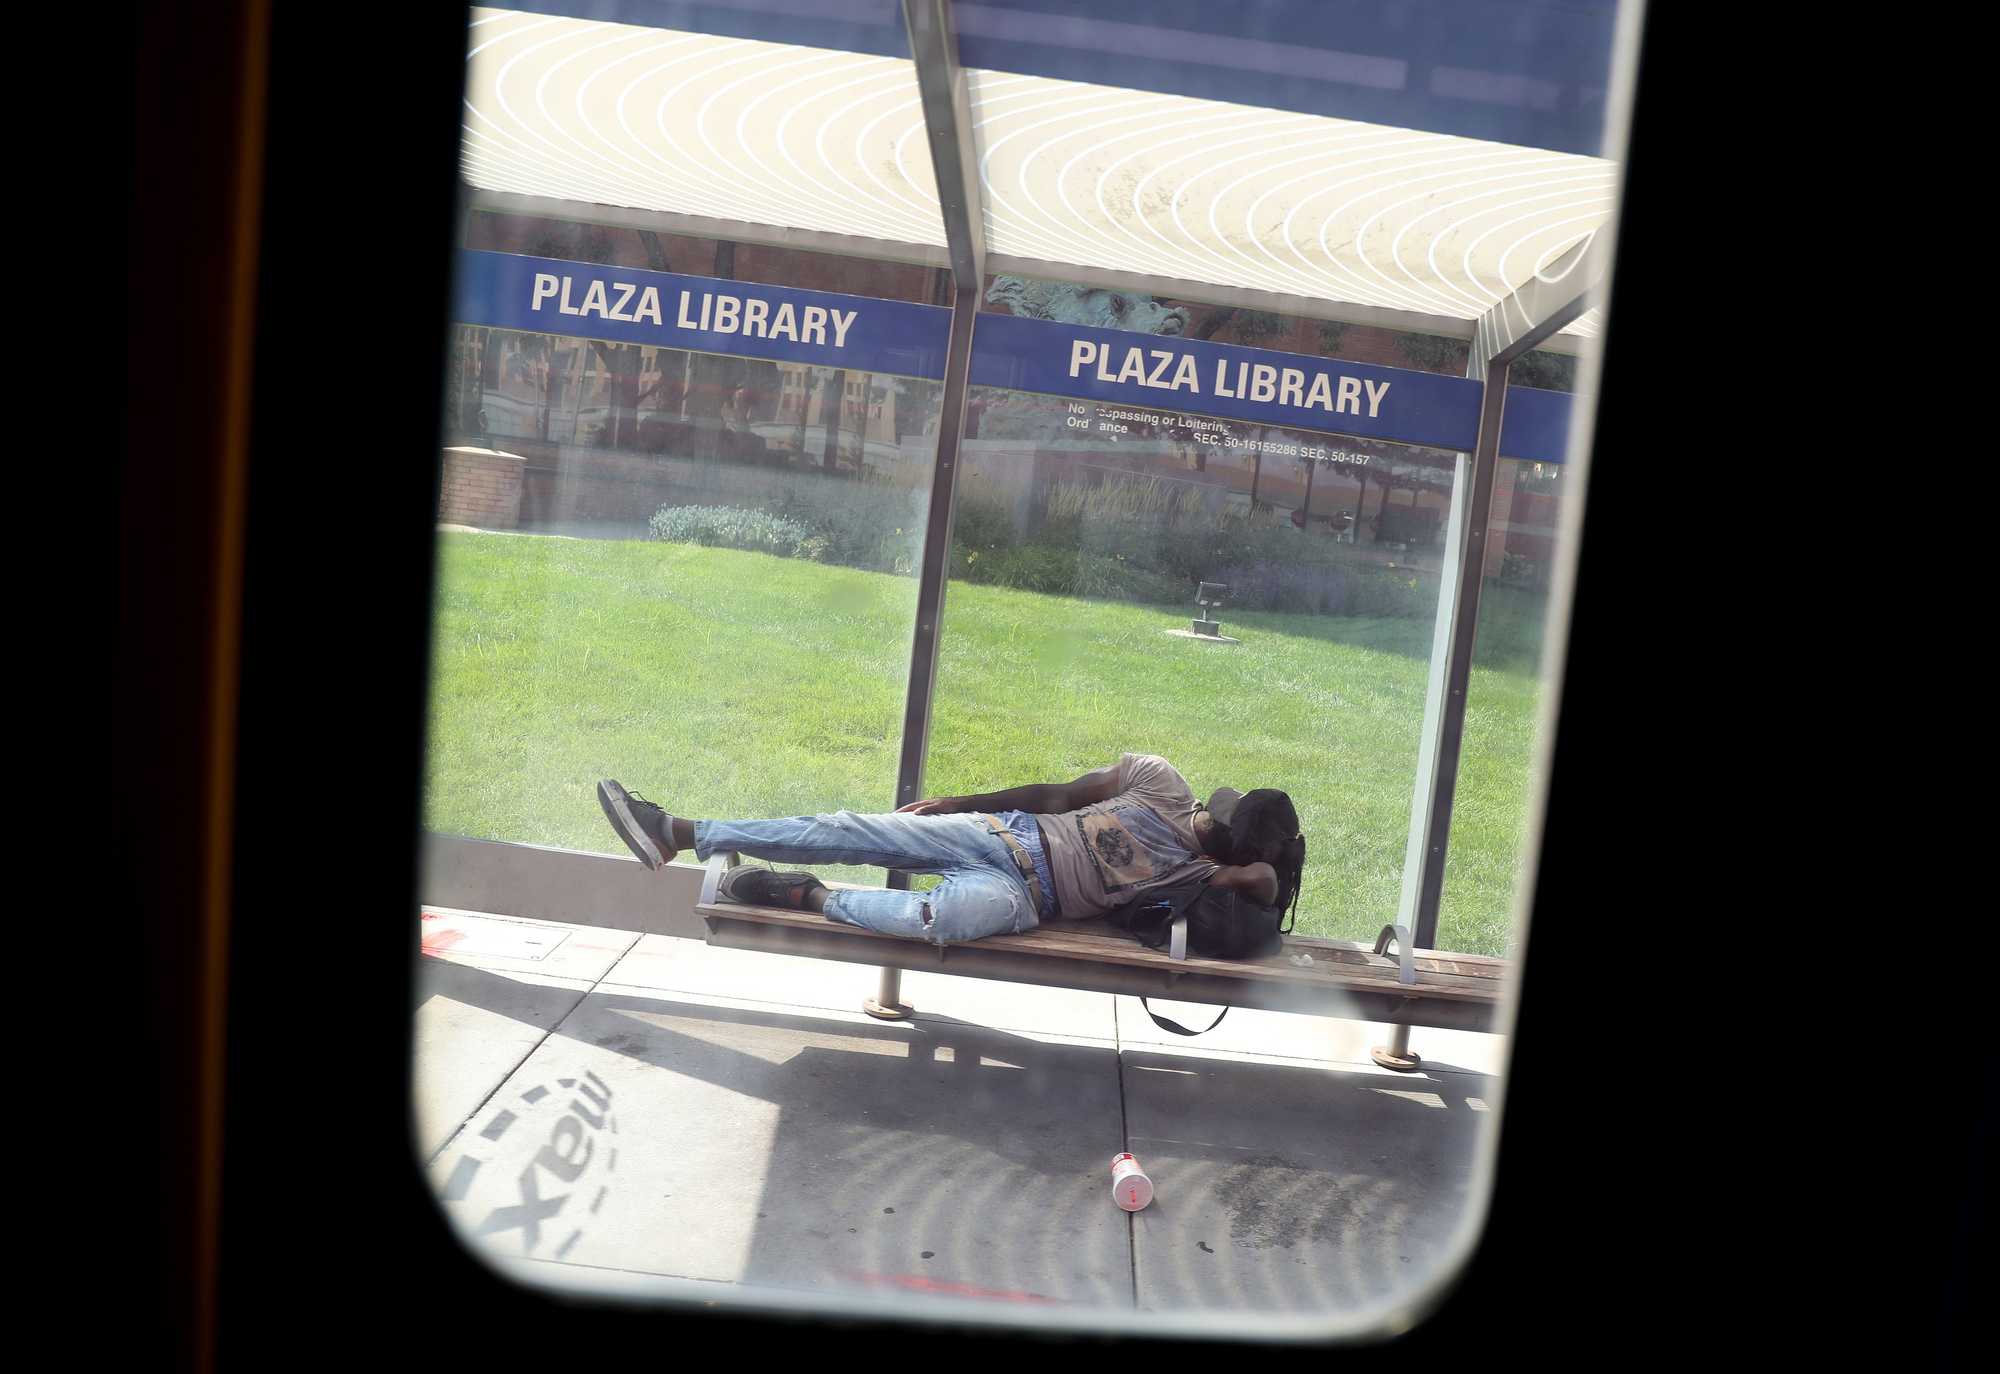  A bus window framed a person napping on a Plaza Library bench in Kansas City.  